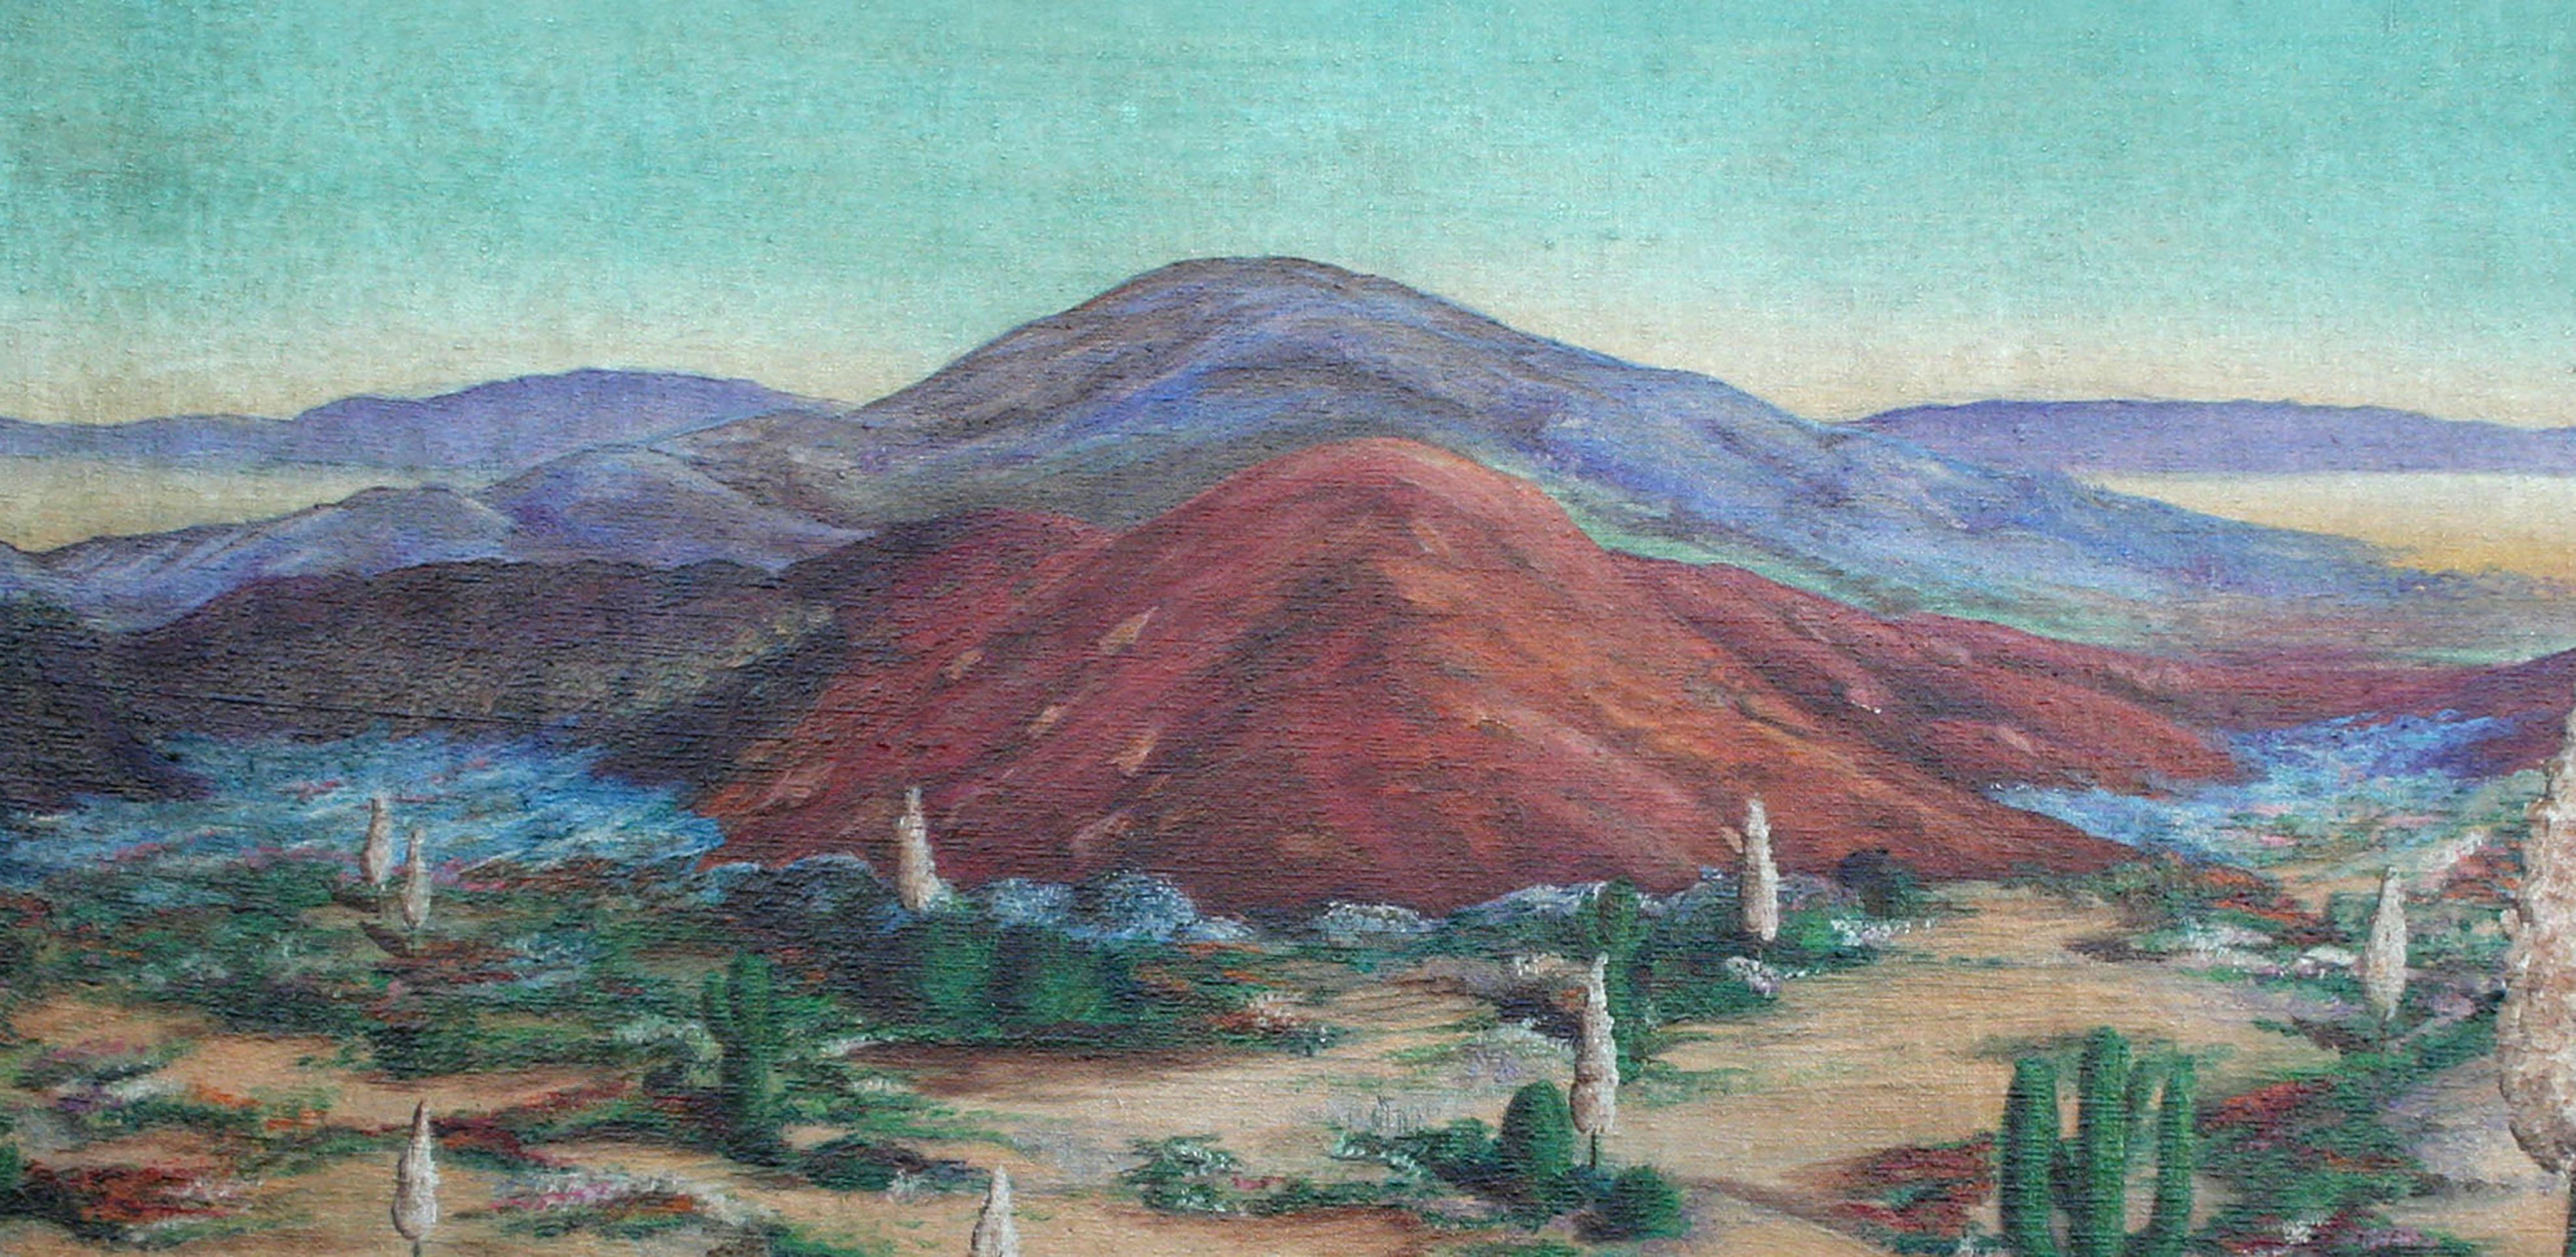 Mid Century Southwest Desert Landscape in Oil on Canvas - American Impressionist Painting by C. Gallagher